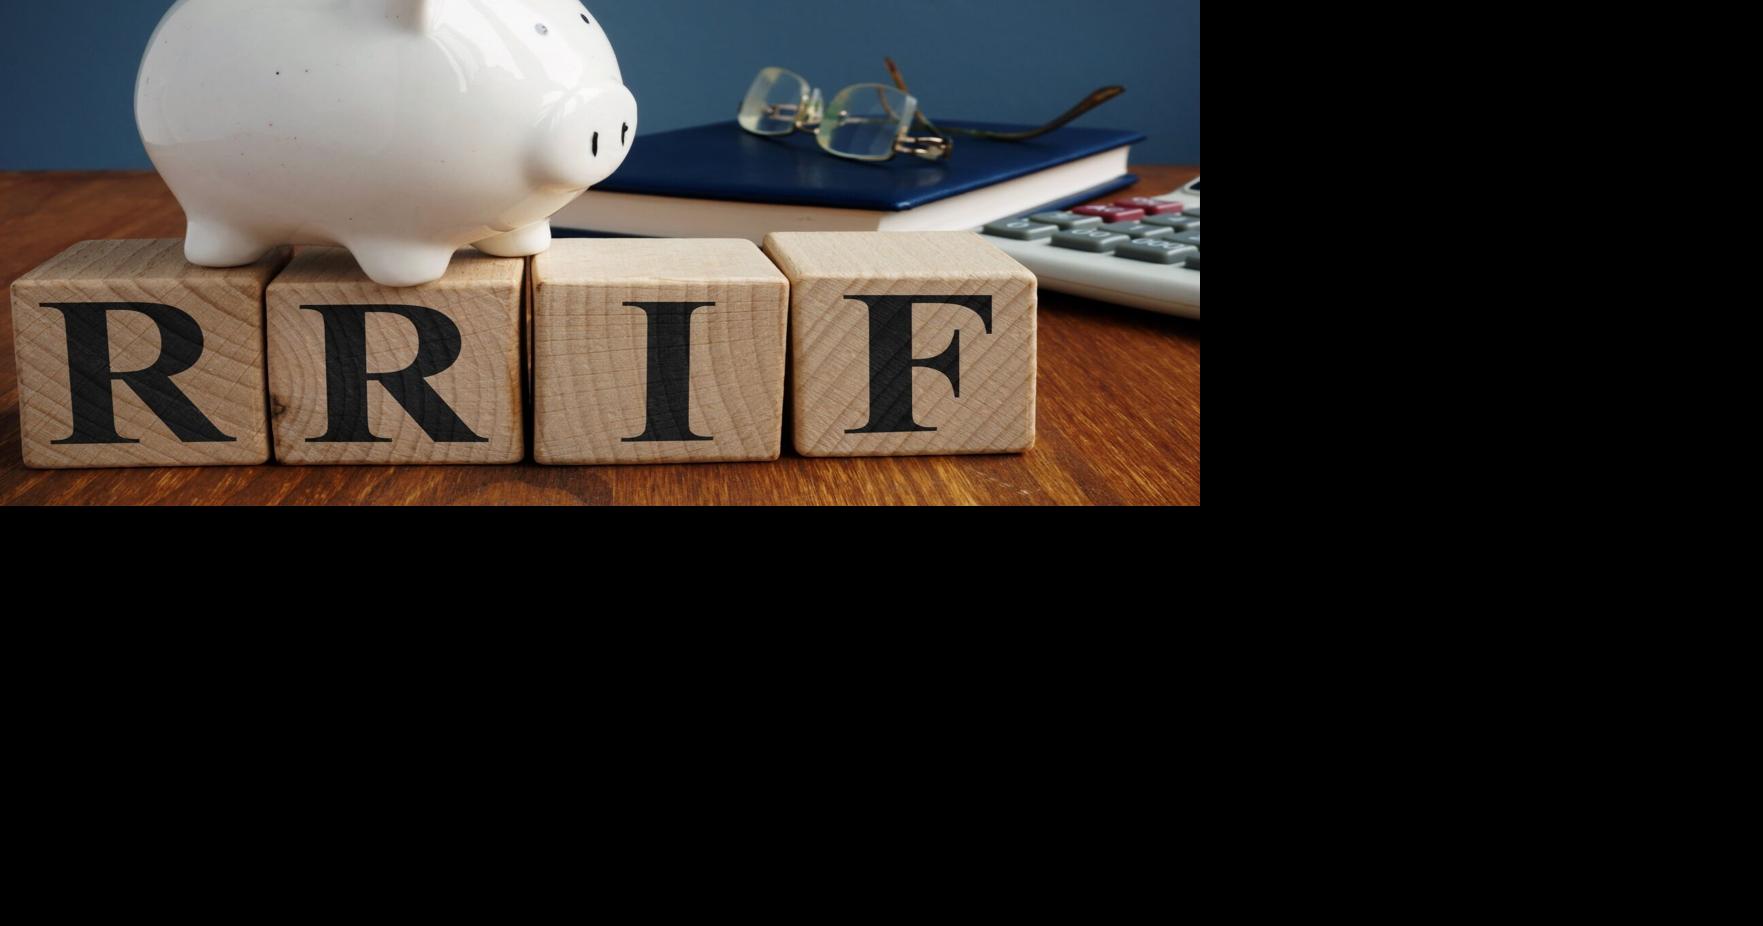 Happy 71st birthday! You now must convert your RRSP into a RRIF. Here’s what you need to know